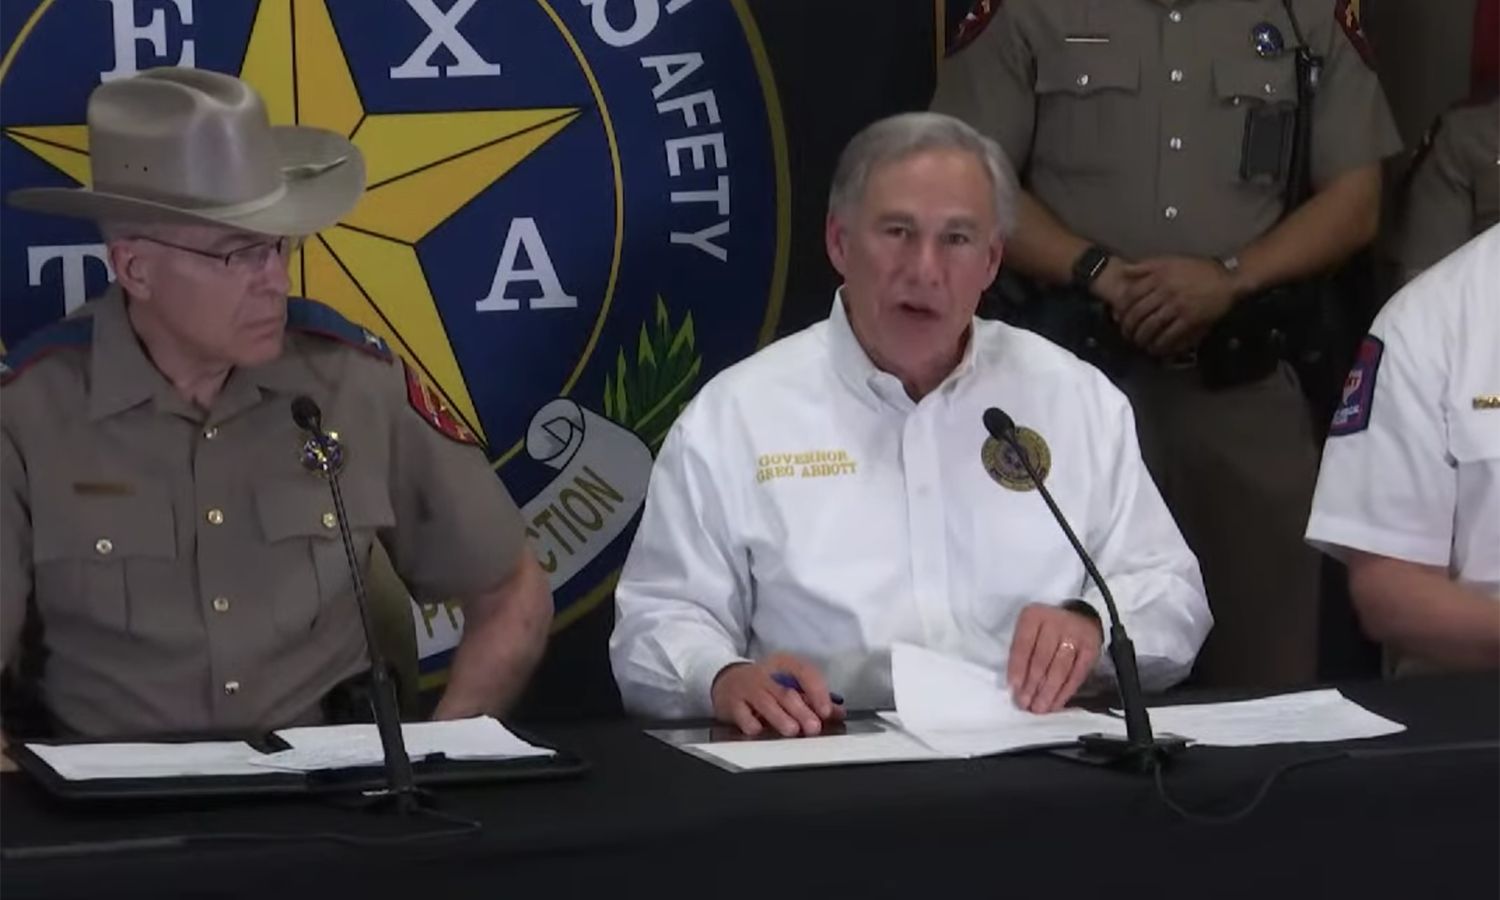   
																Abbott expanding Operation Lone Star in effort to secure southern border - The Heartlander 
															 